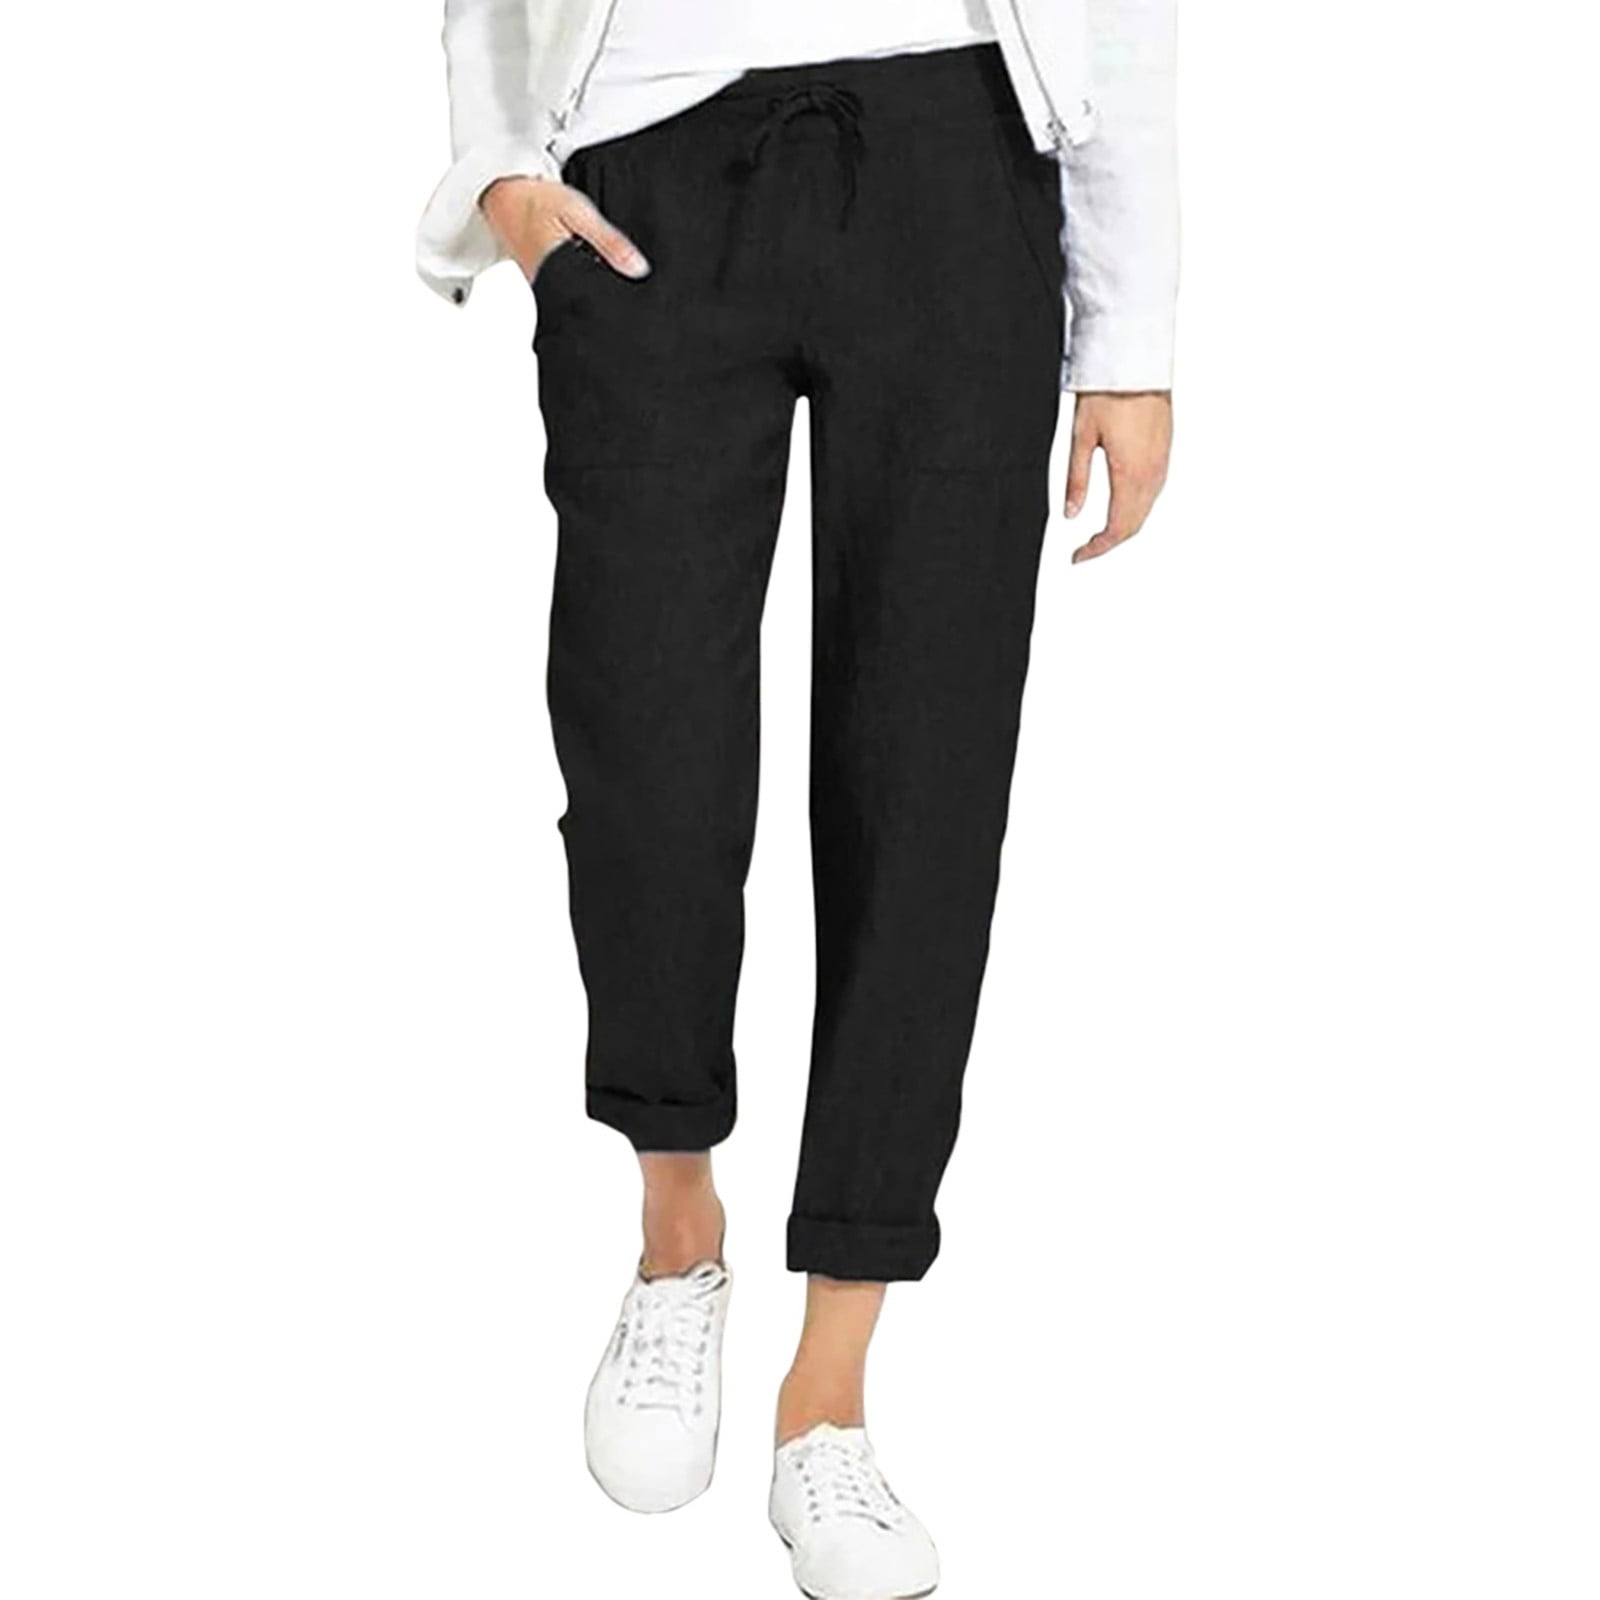 Akiihool Pants For Women Dressy Casual Women's Golf Pants with Pockets ...